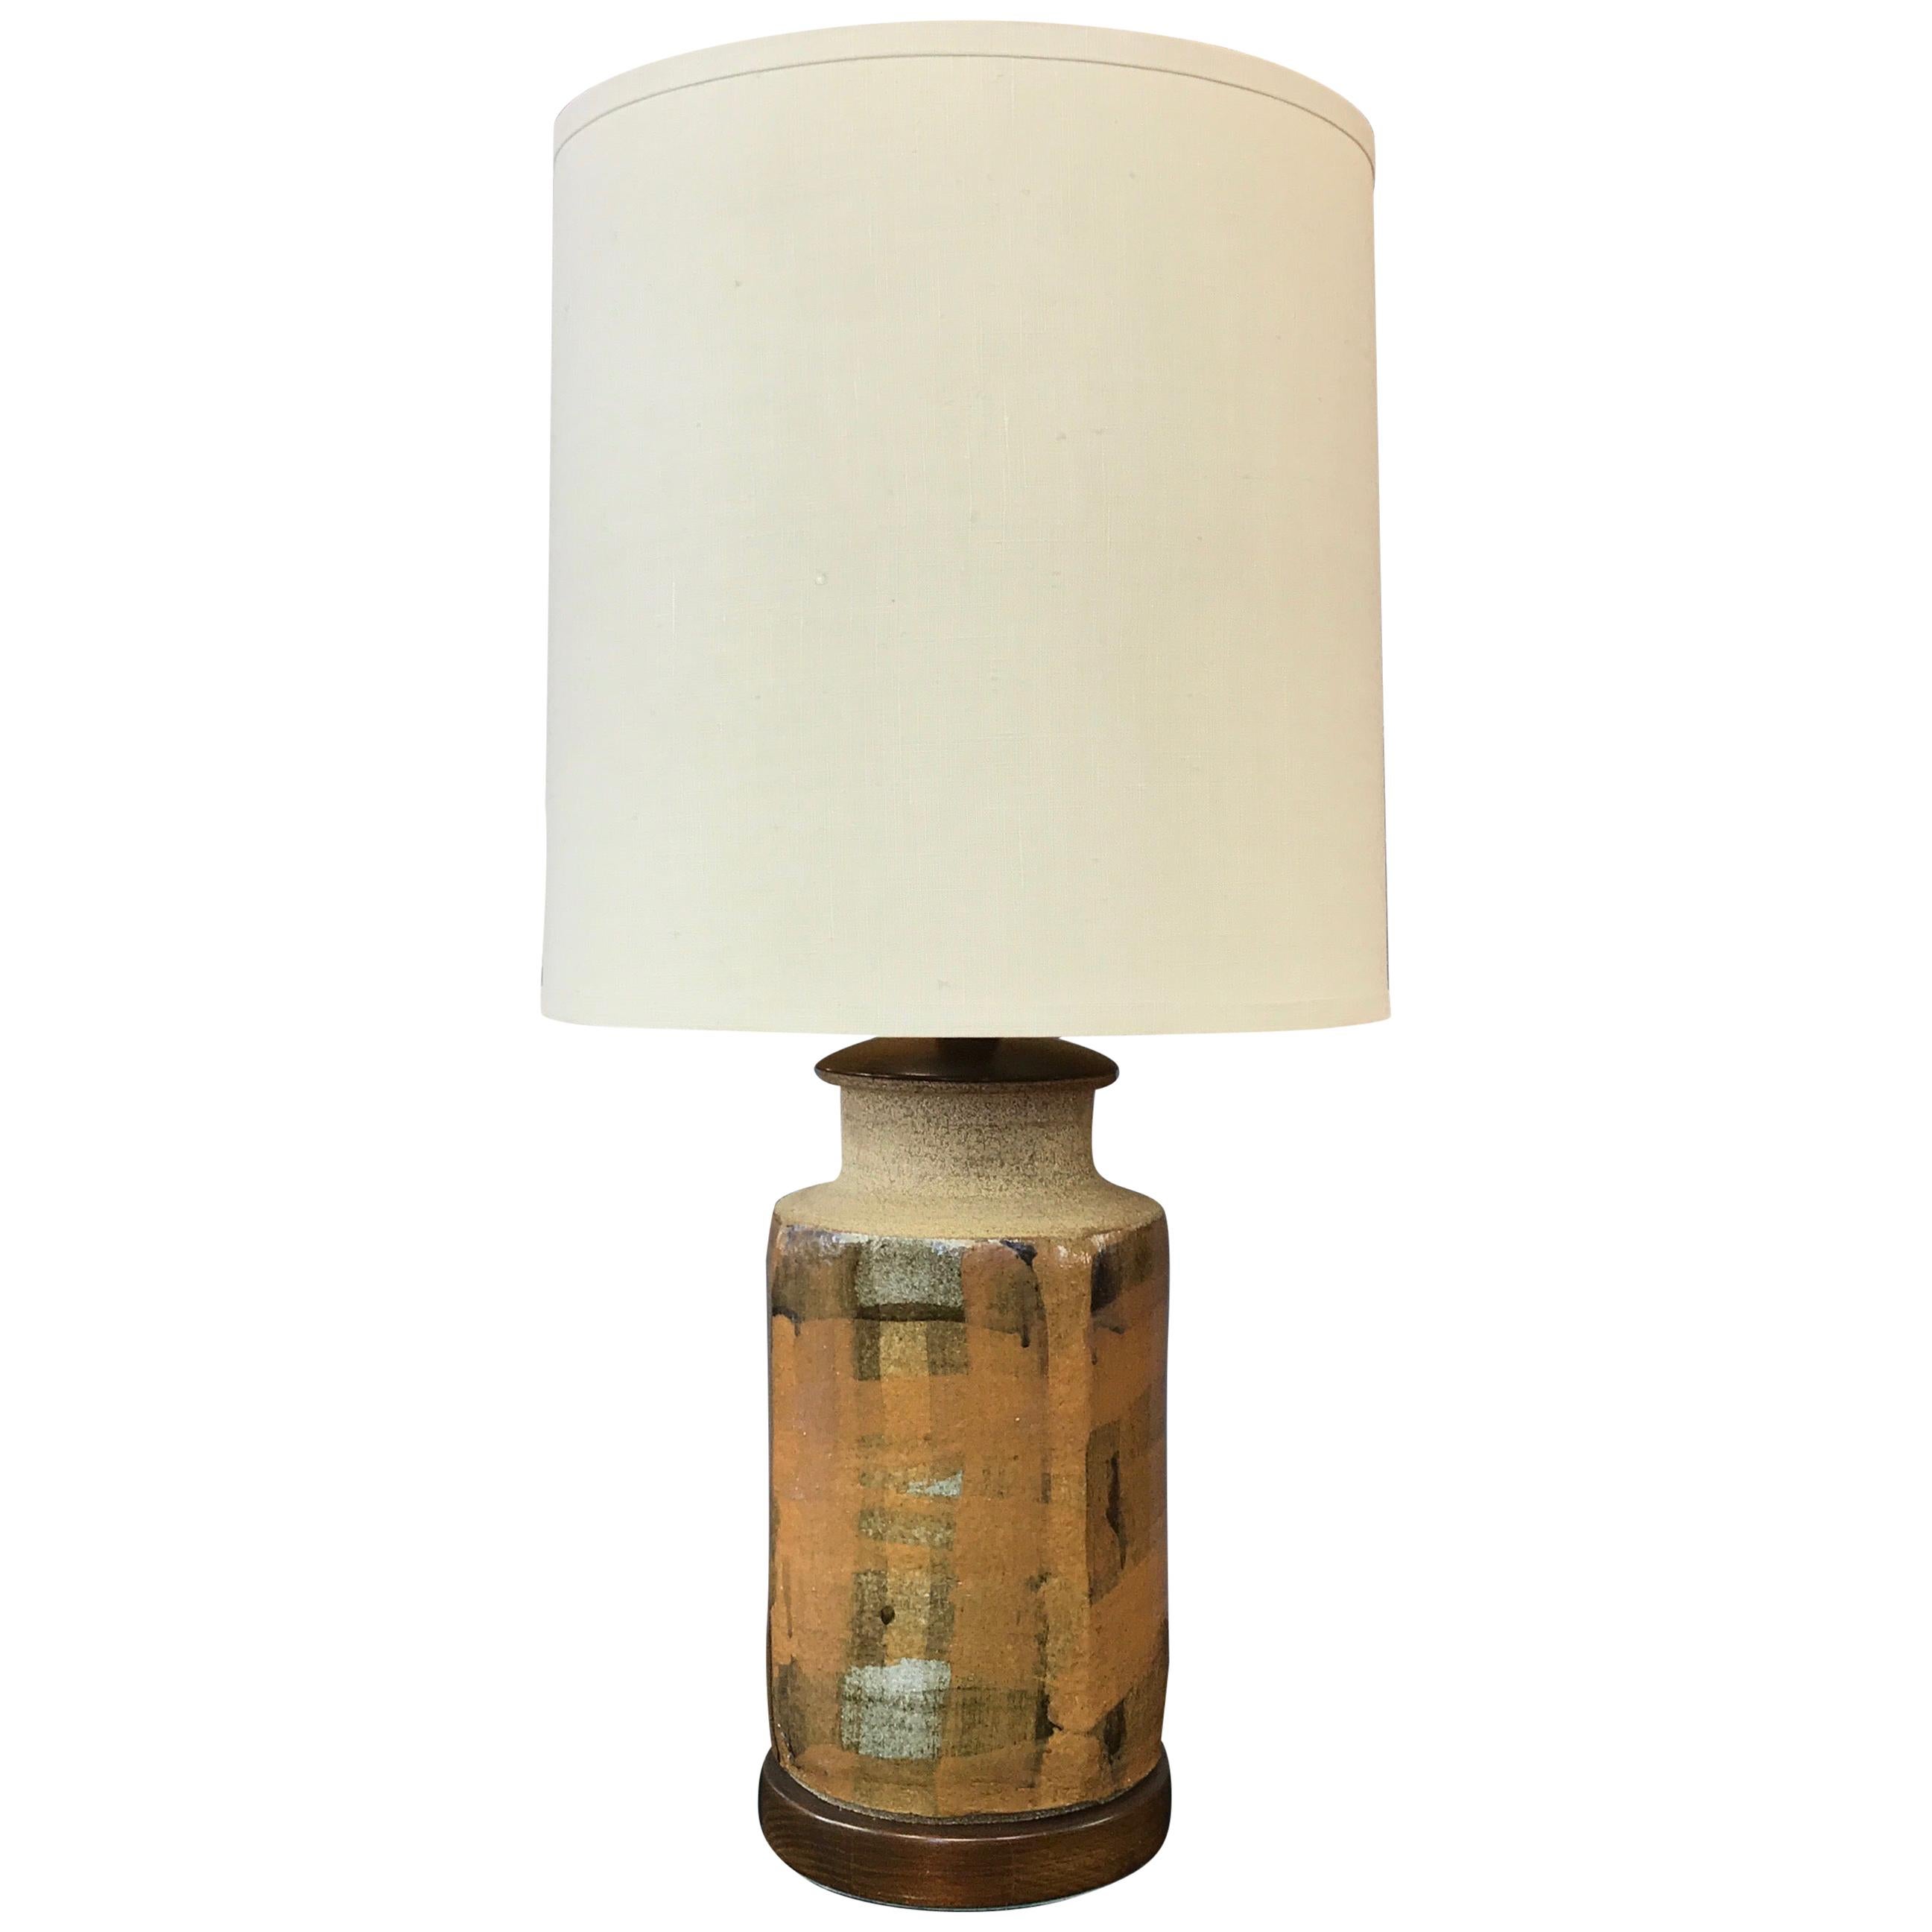 An especially handsome and well-crafted Mid-Century Modern stoneware and walnut table lamp by renowned California ceramic and studio pottery artist Brent Bennett.

Stylized ginger jar form with rounded four-sided body featuring artistically